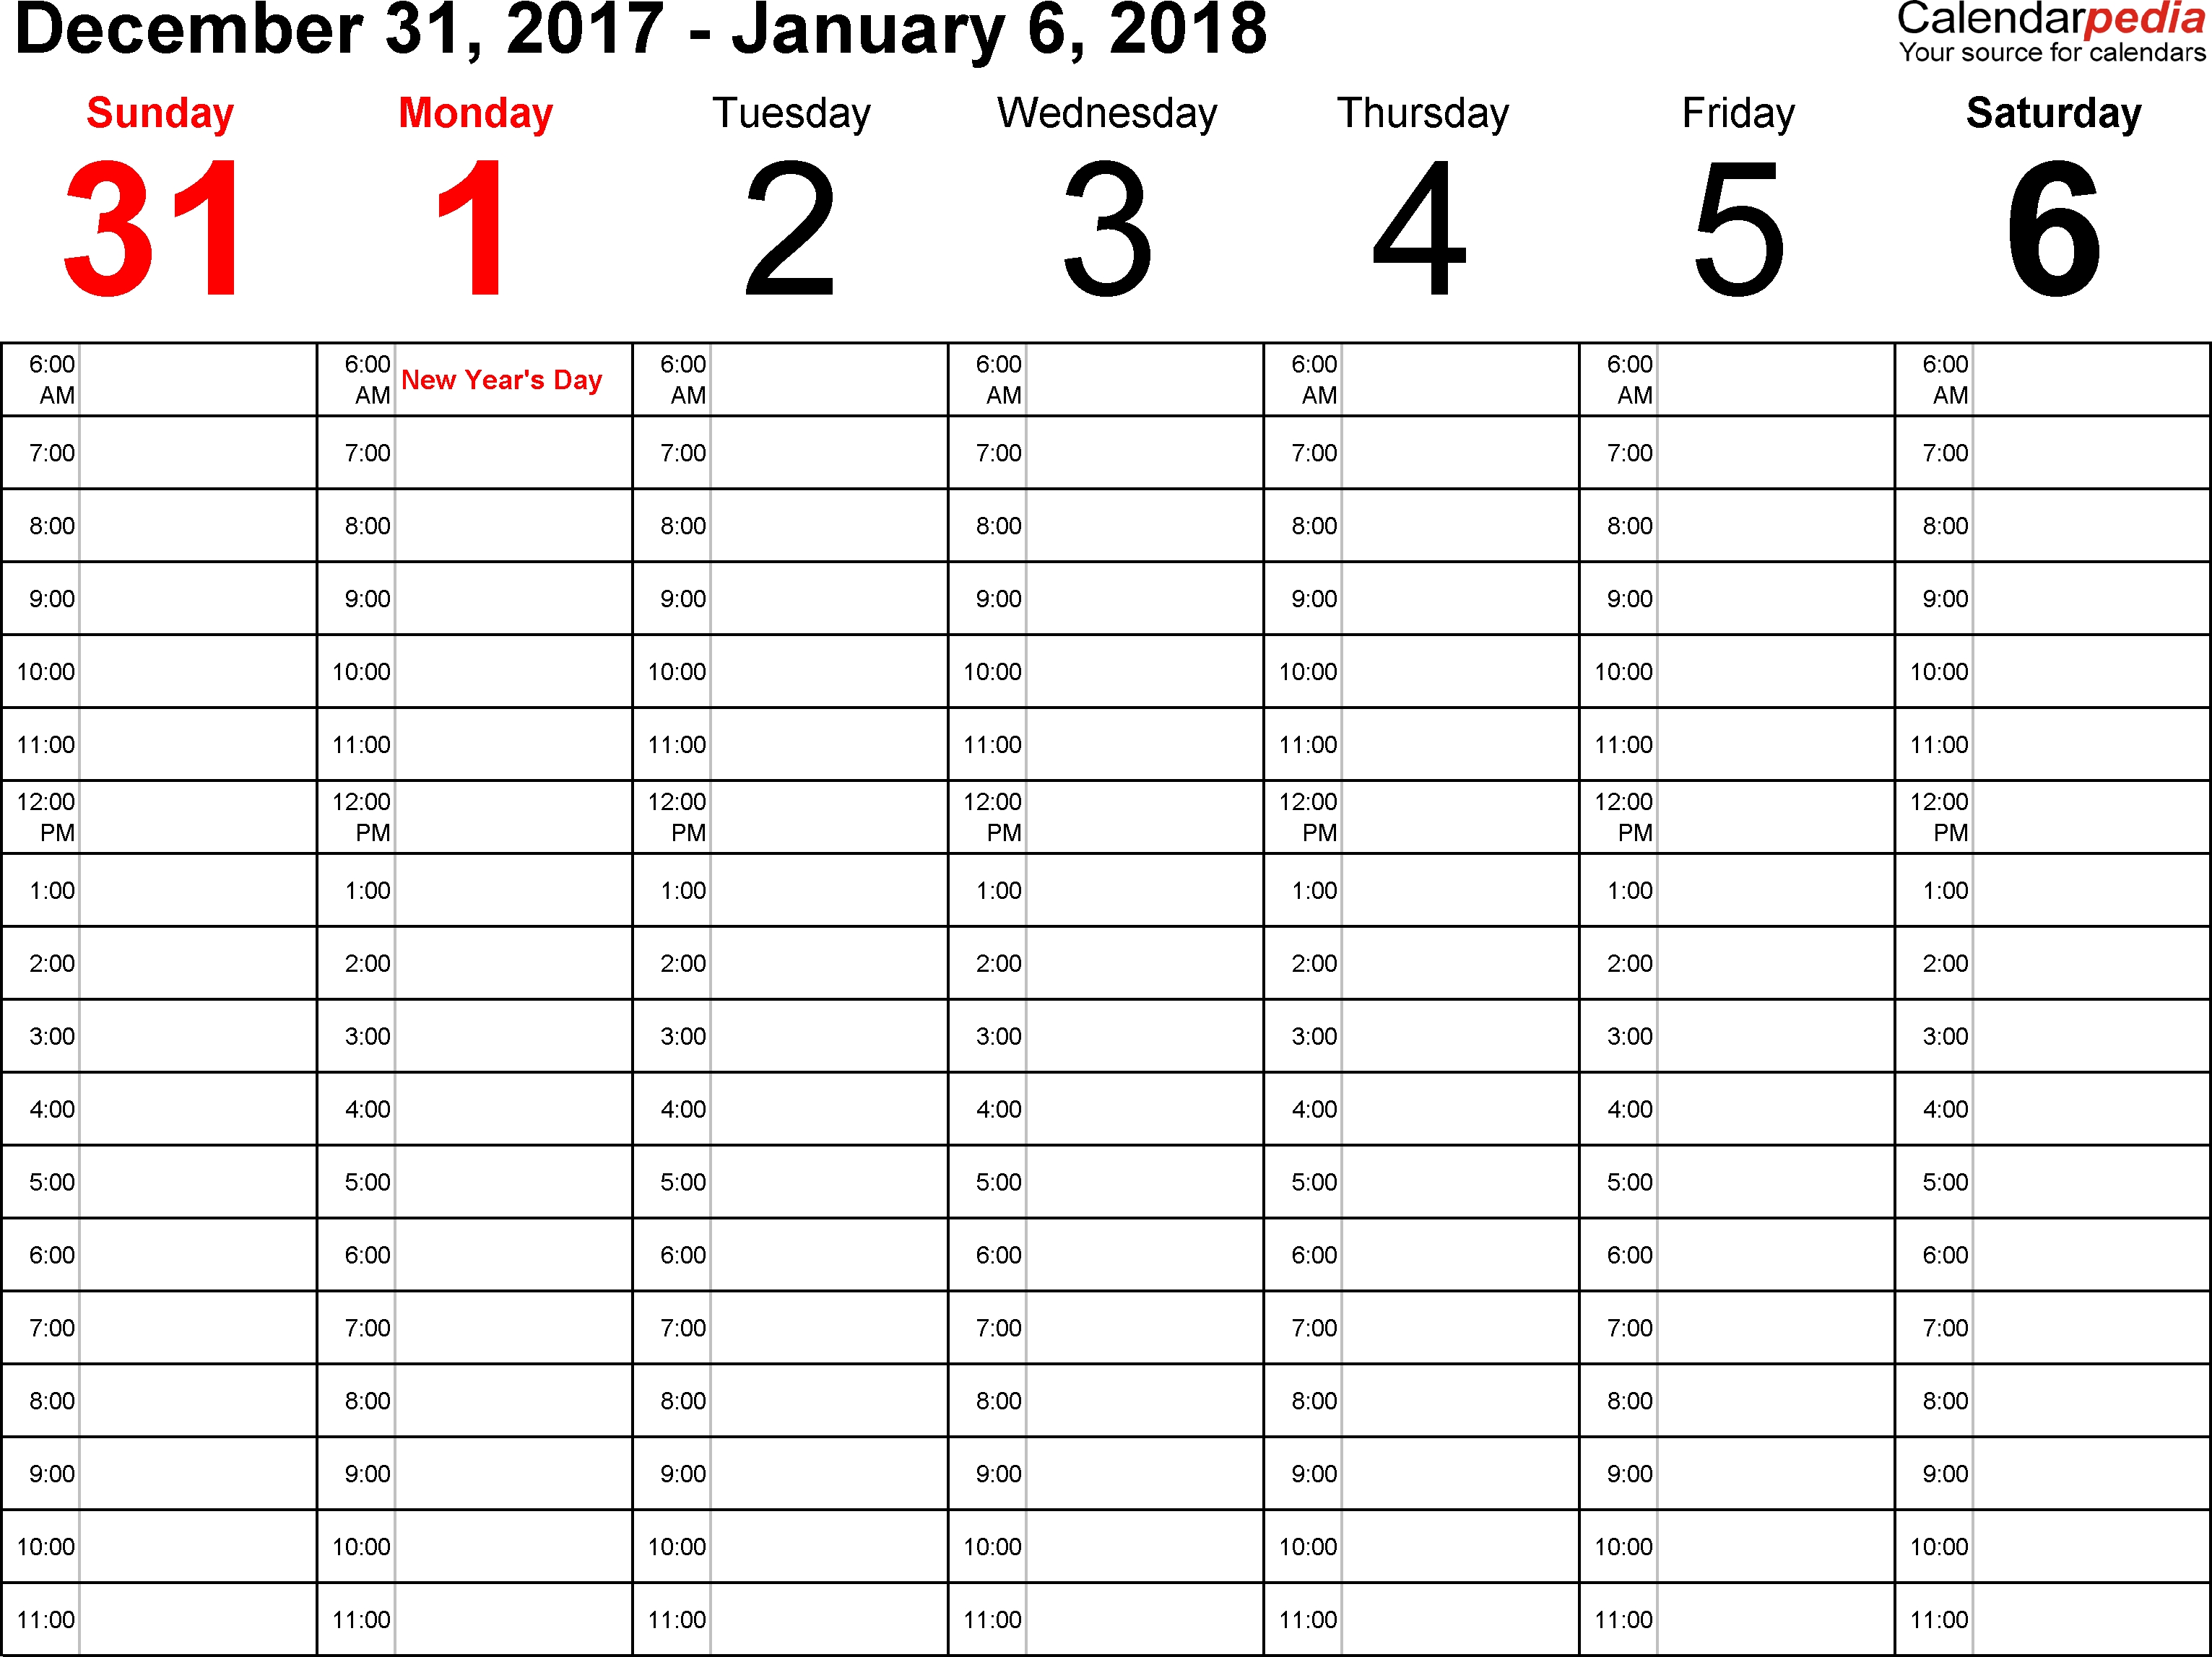 Weekly Calendar 2018 For Excel - 12 Free Printable Templates  30 Day Calendar With Circle With A Line Thru It